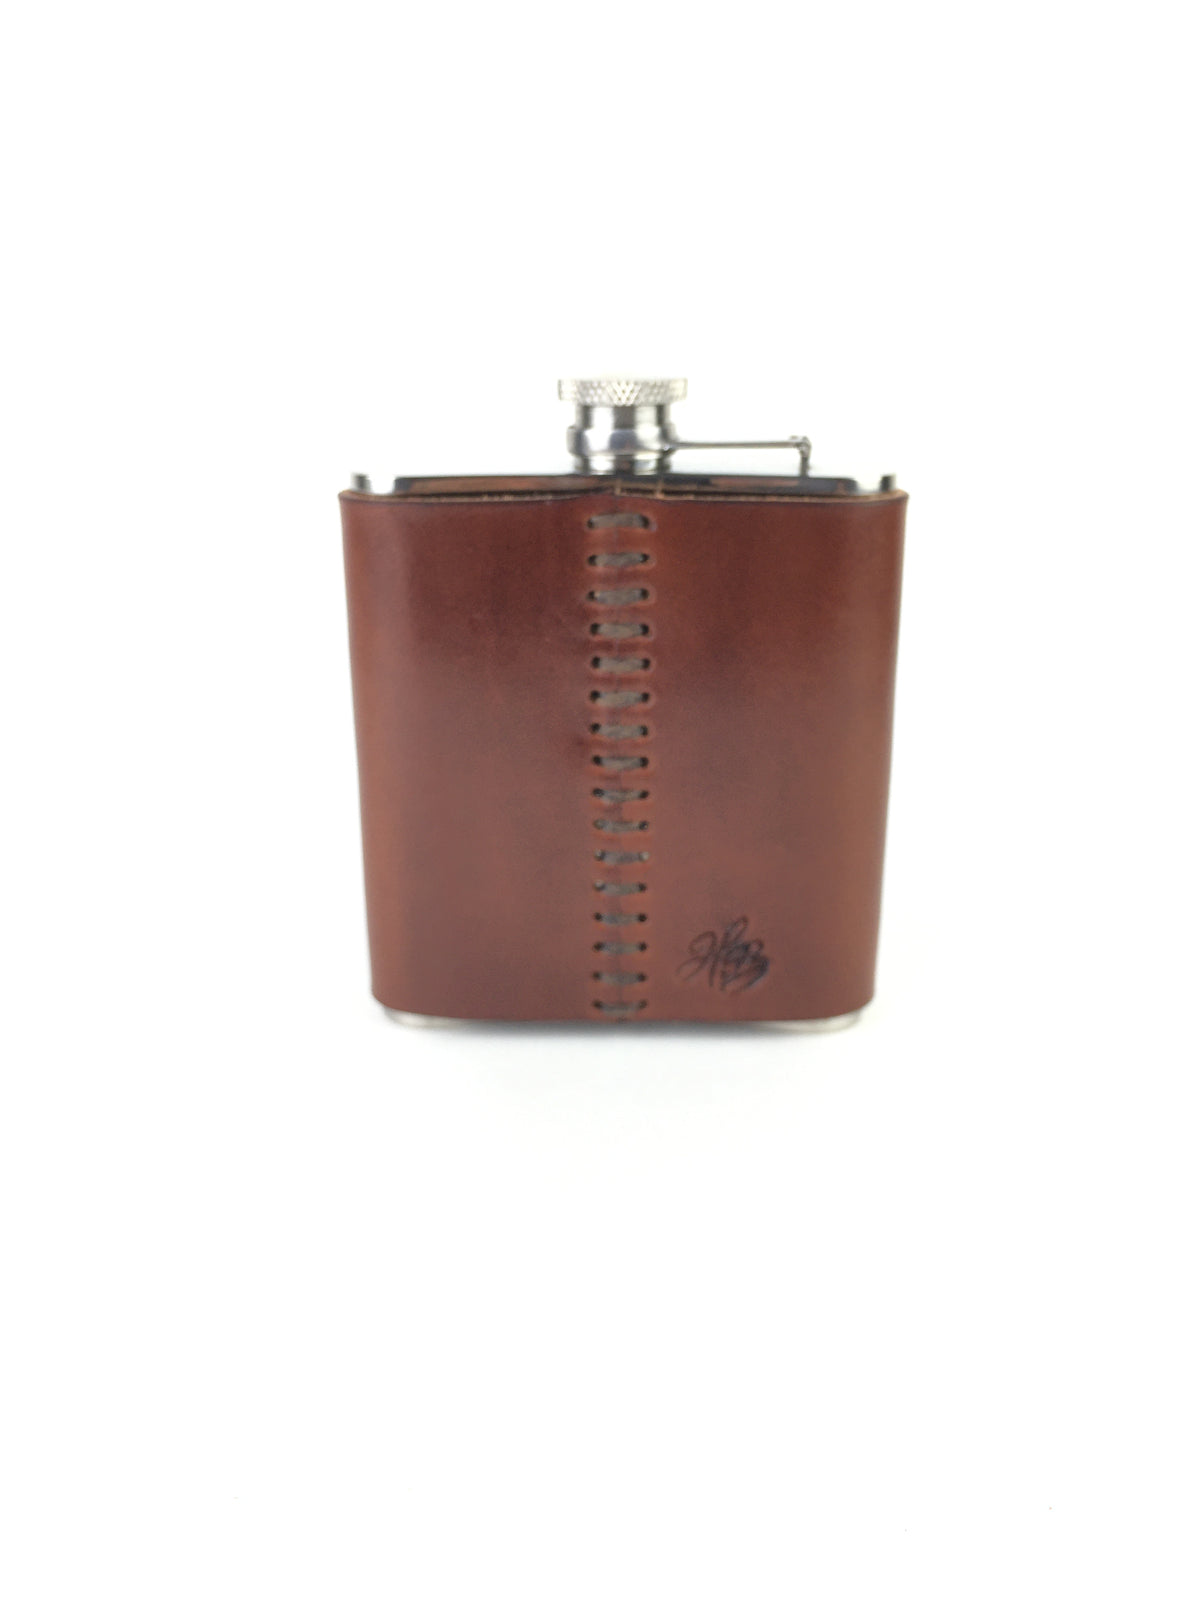 H+B WHISKY FLASK | ESPRESSO BROWN LEATHER